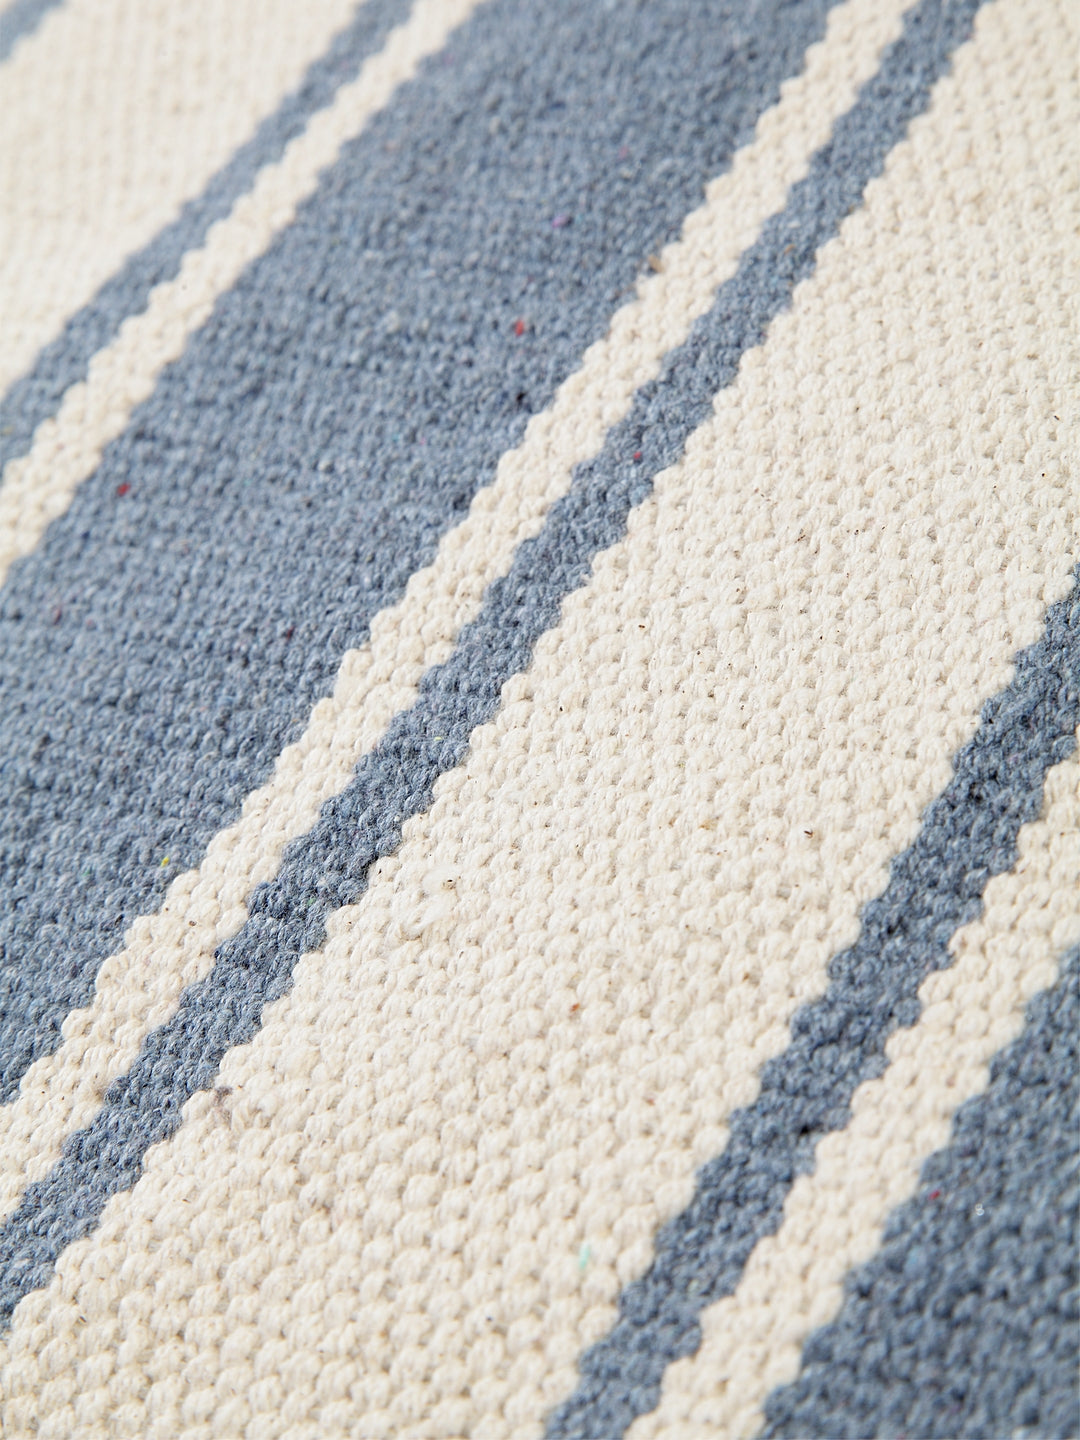 Woven Striped Rug